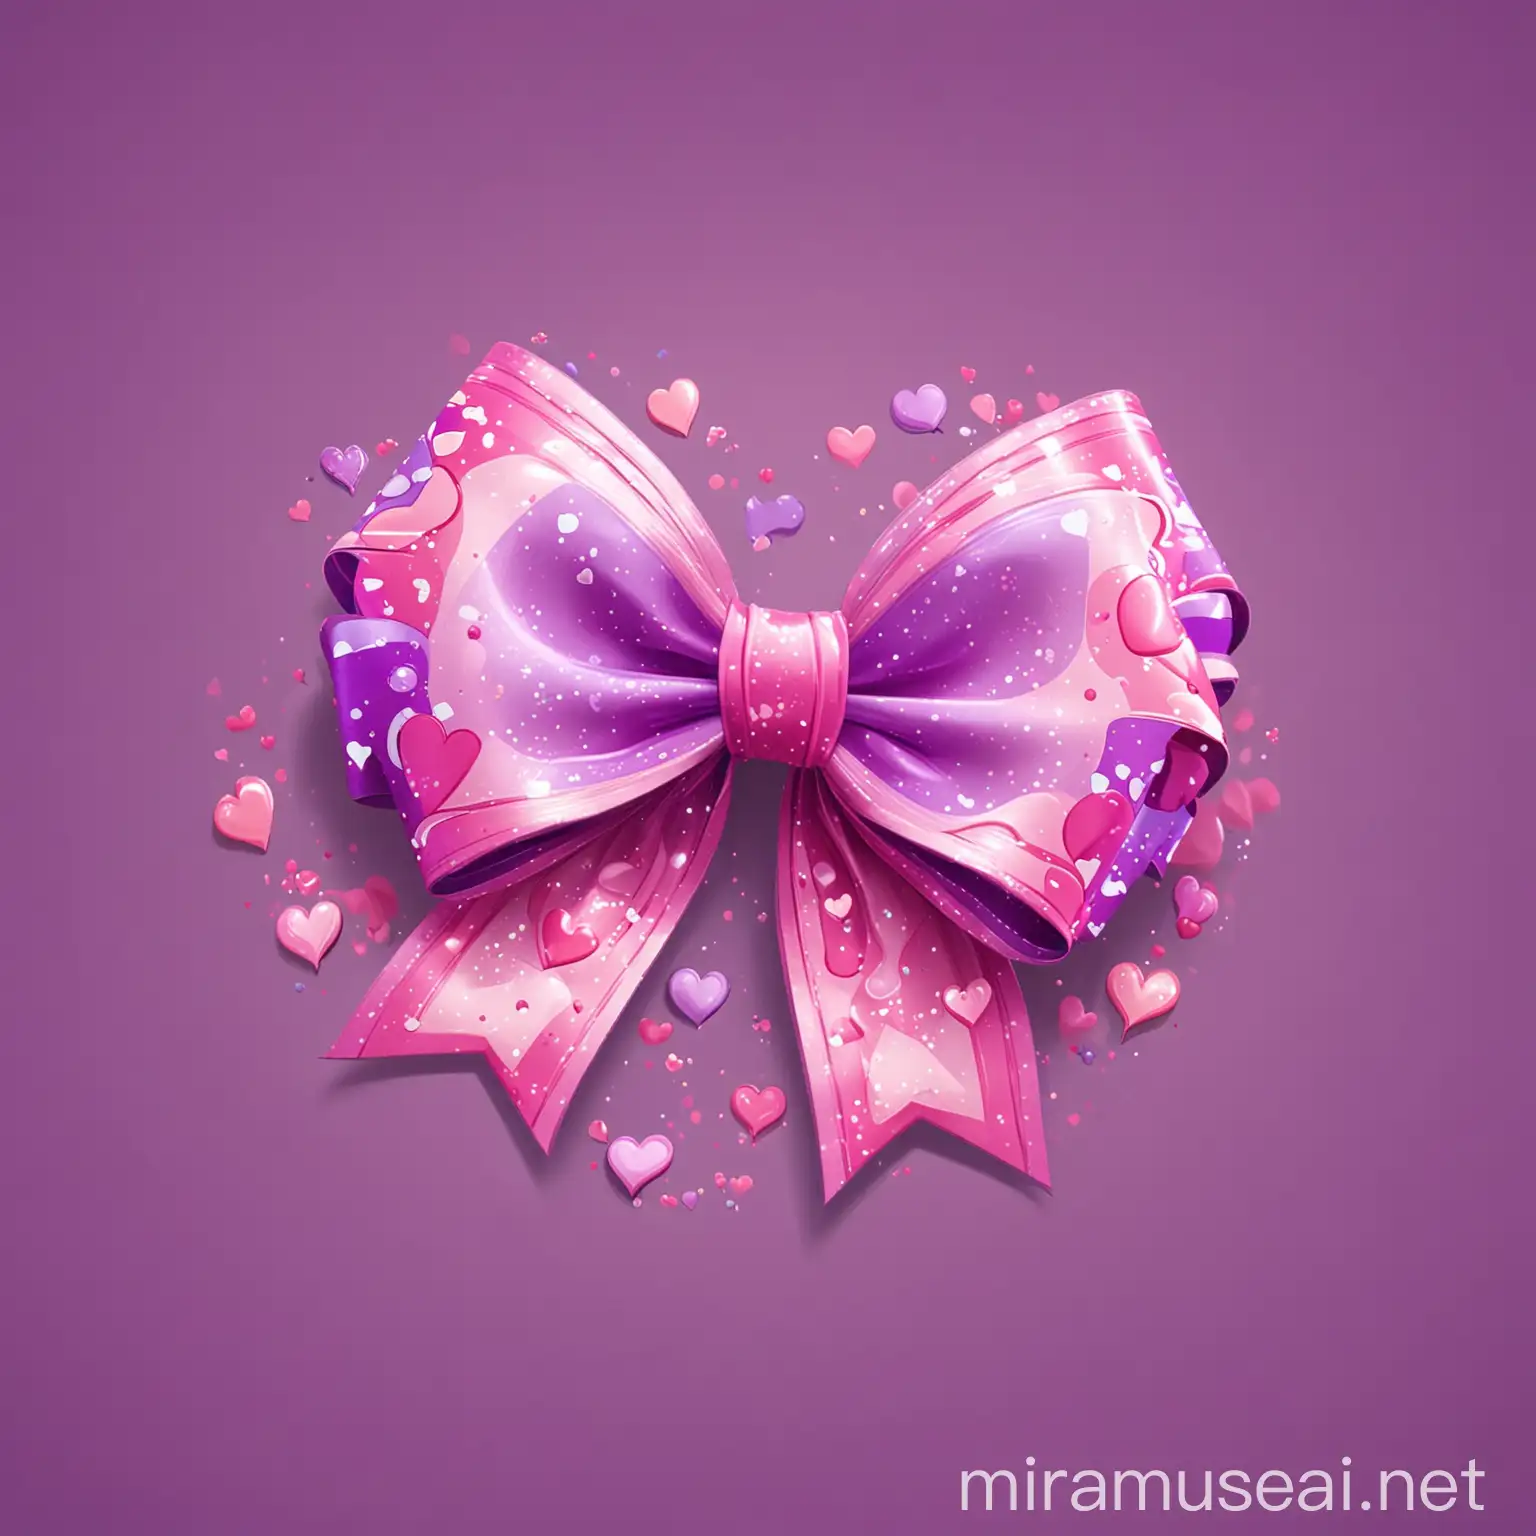 cartoon fantasy bow, purple and pink love bow with hearts